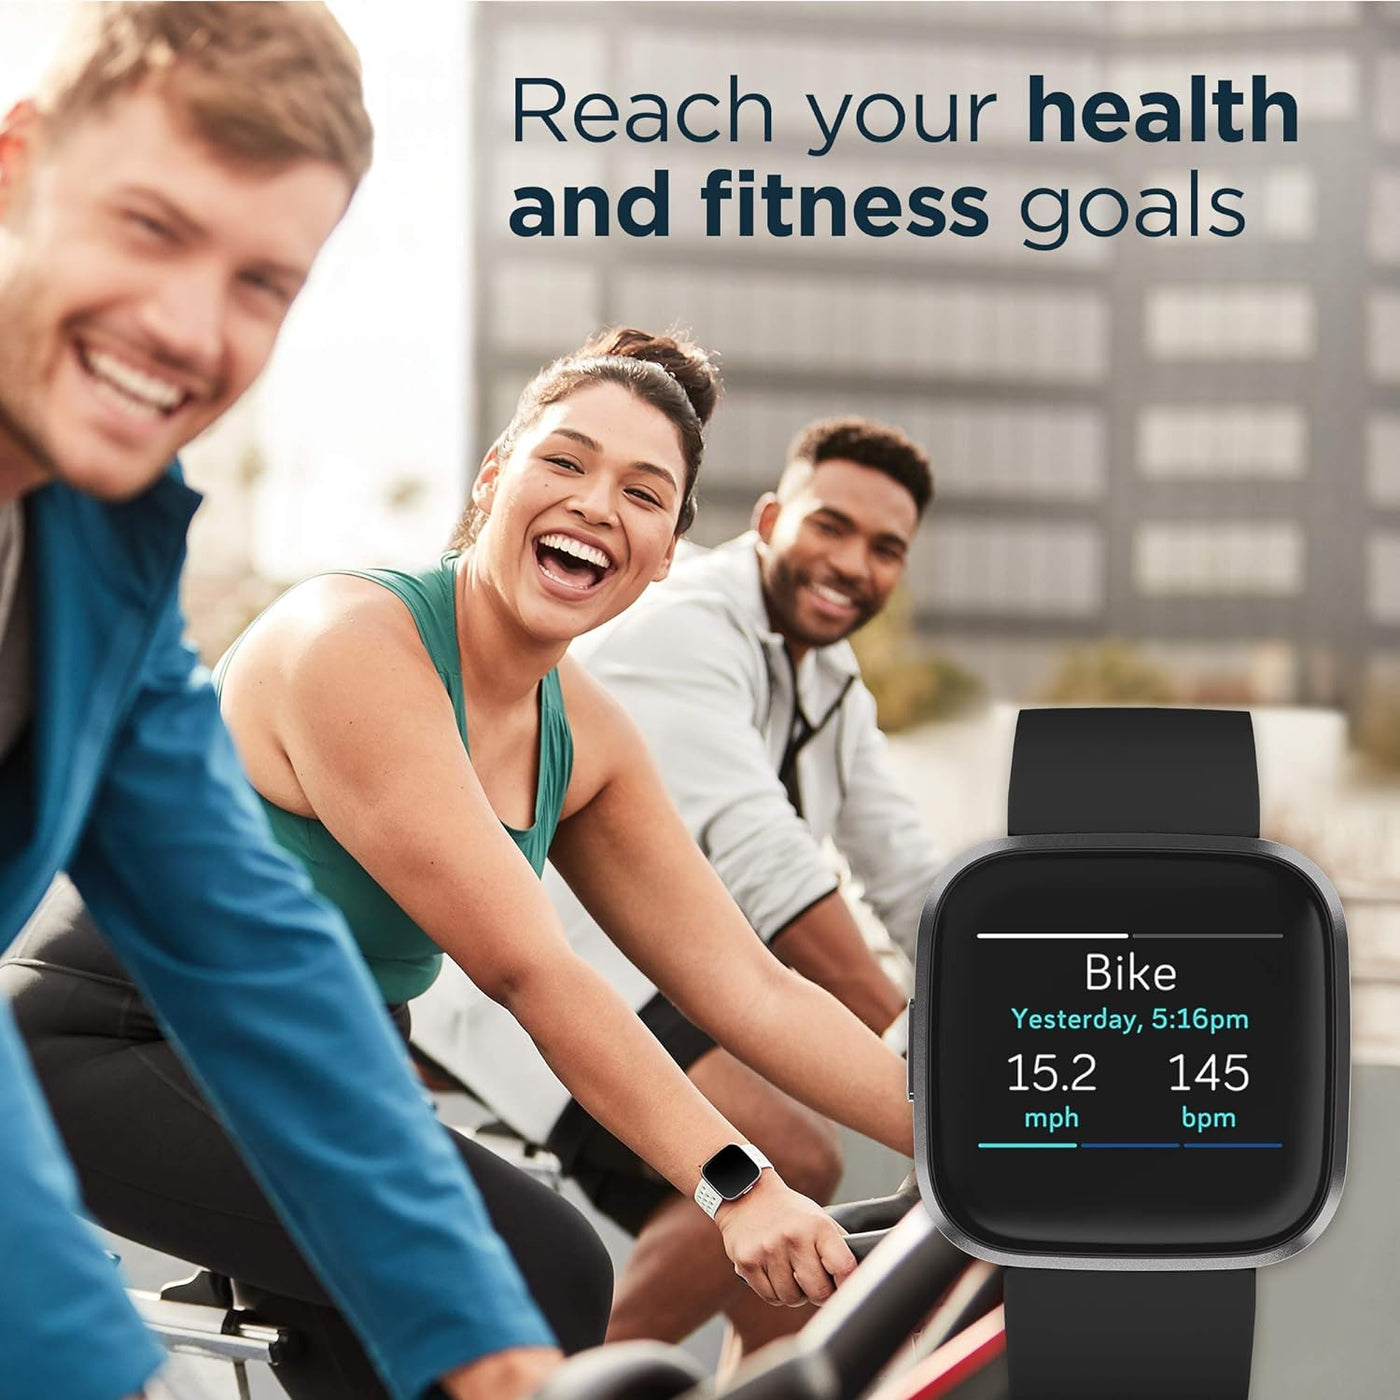 Fitbit Versa 2 Health and Fitness Smartwatch, Black/Carbon - $90